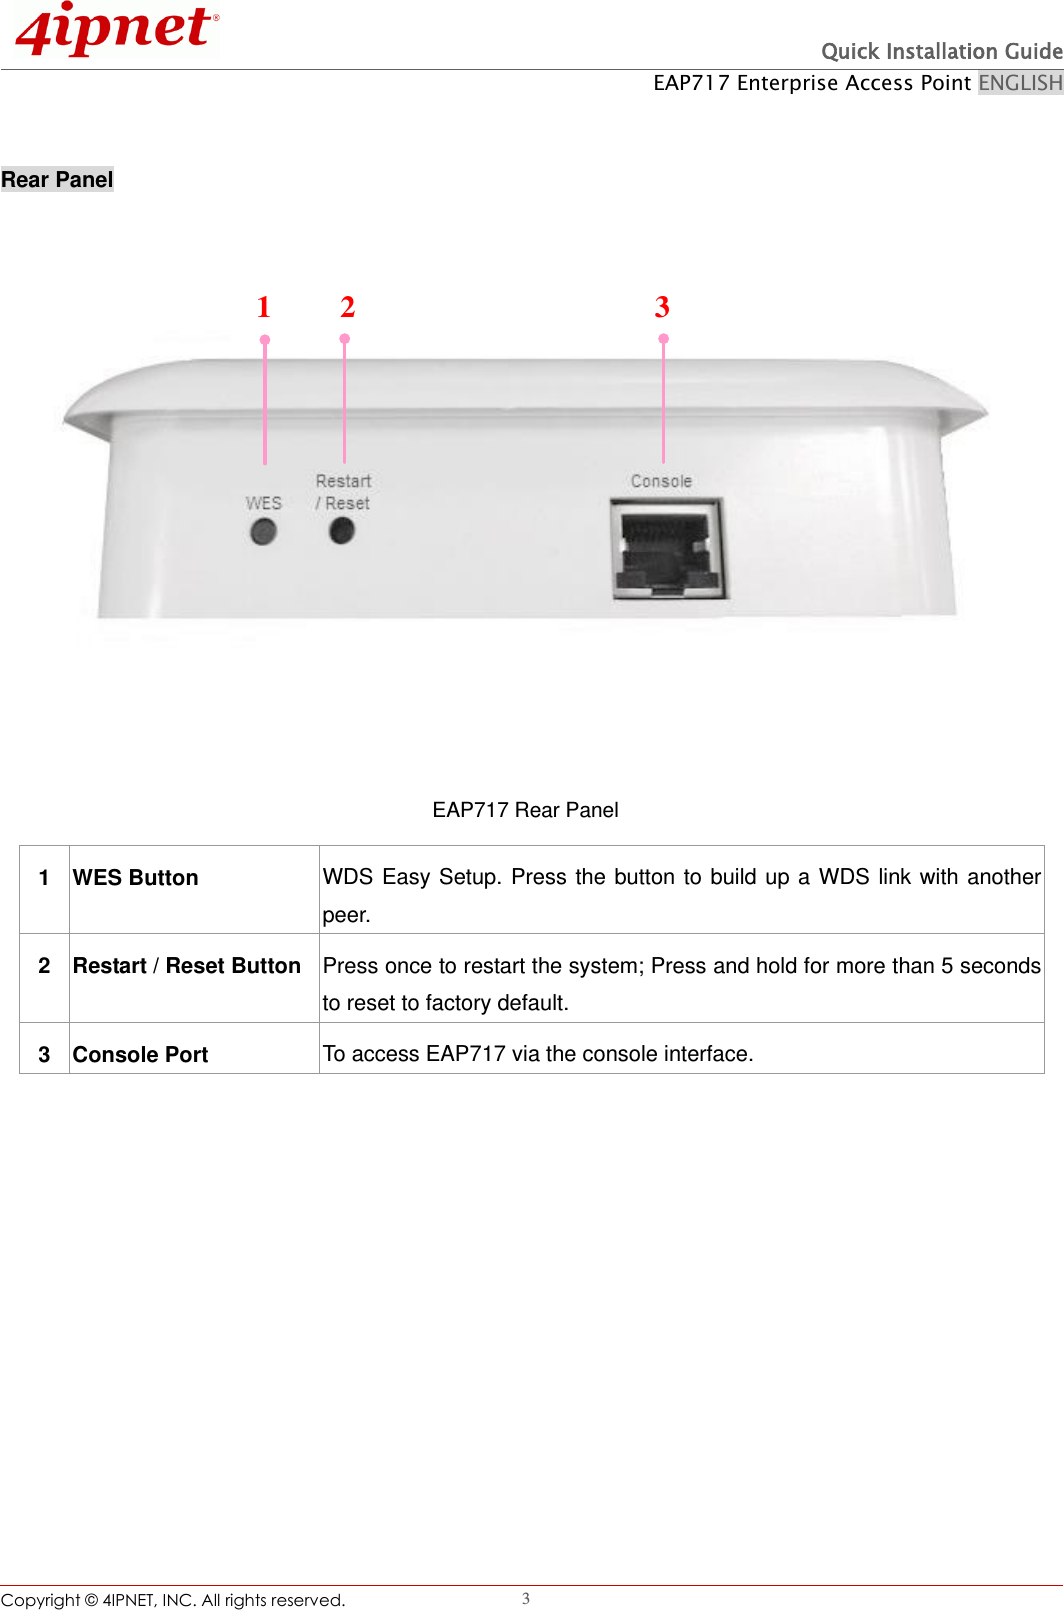  Quick Installation Guide EAP717 Enterprise Access Point ENGLISH Copyright ©  4IPNET, INC. All rights reserved.                                                              3  Rear Panel  1 2 3 EAP717 Rear Panel       1 WES Button WDS Easy Setup. Press the button to build up a WDS link with another peer. 2 Restart / Reset Button Press once to restart the system; Press and hold for more than 5 seconds to reset to factory default. 3 Console Port To access EAP717 via the console interface. 